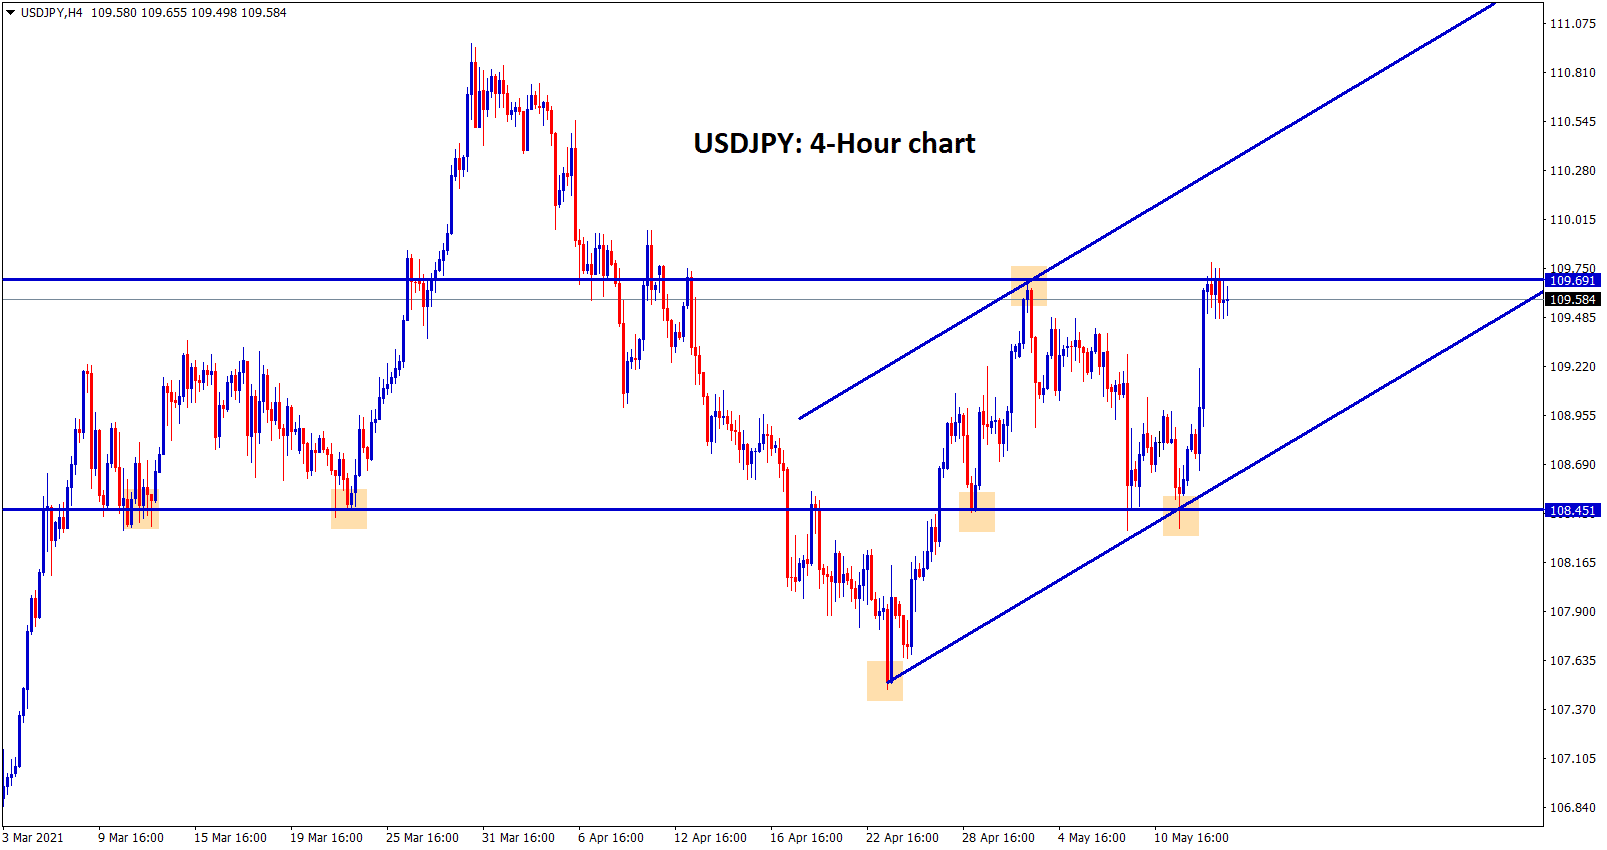 USDJPY standing at the resistance level